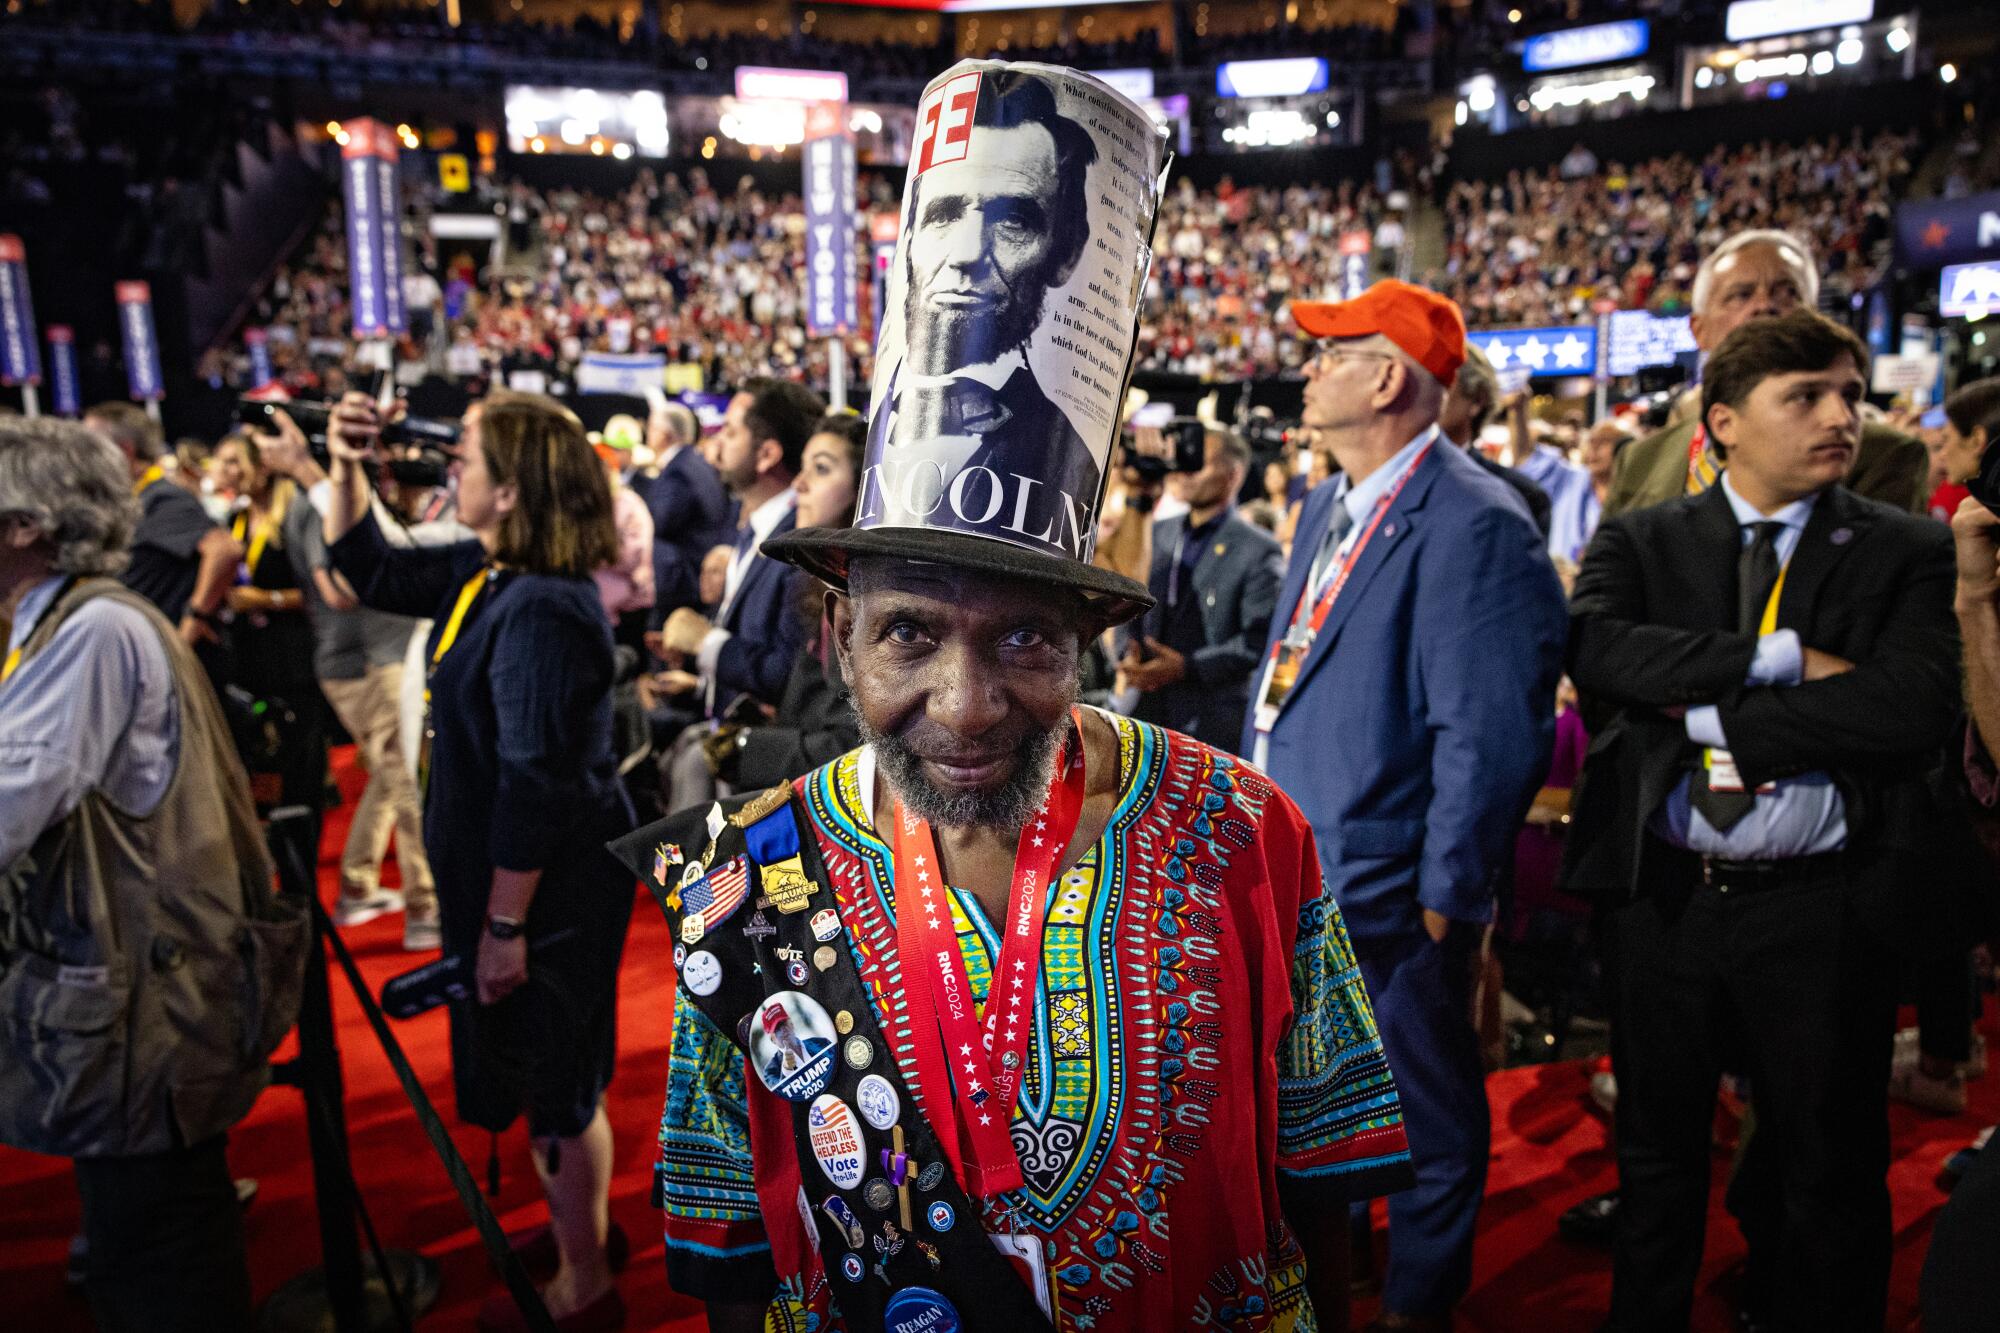 Alvin Porter Jr. of South Carolina wears a Lincoln top hat at the 2024 Republican National Convention.